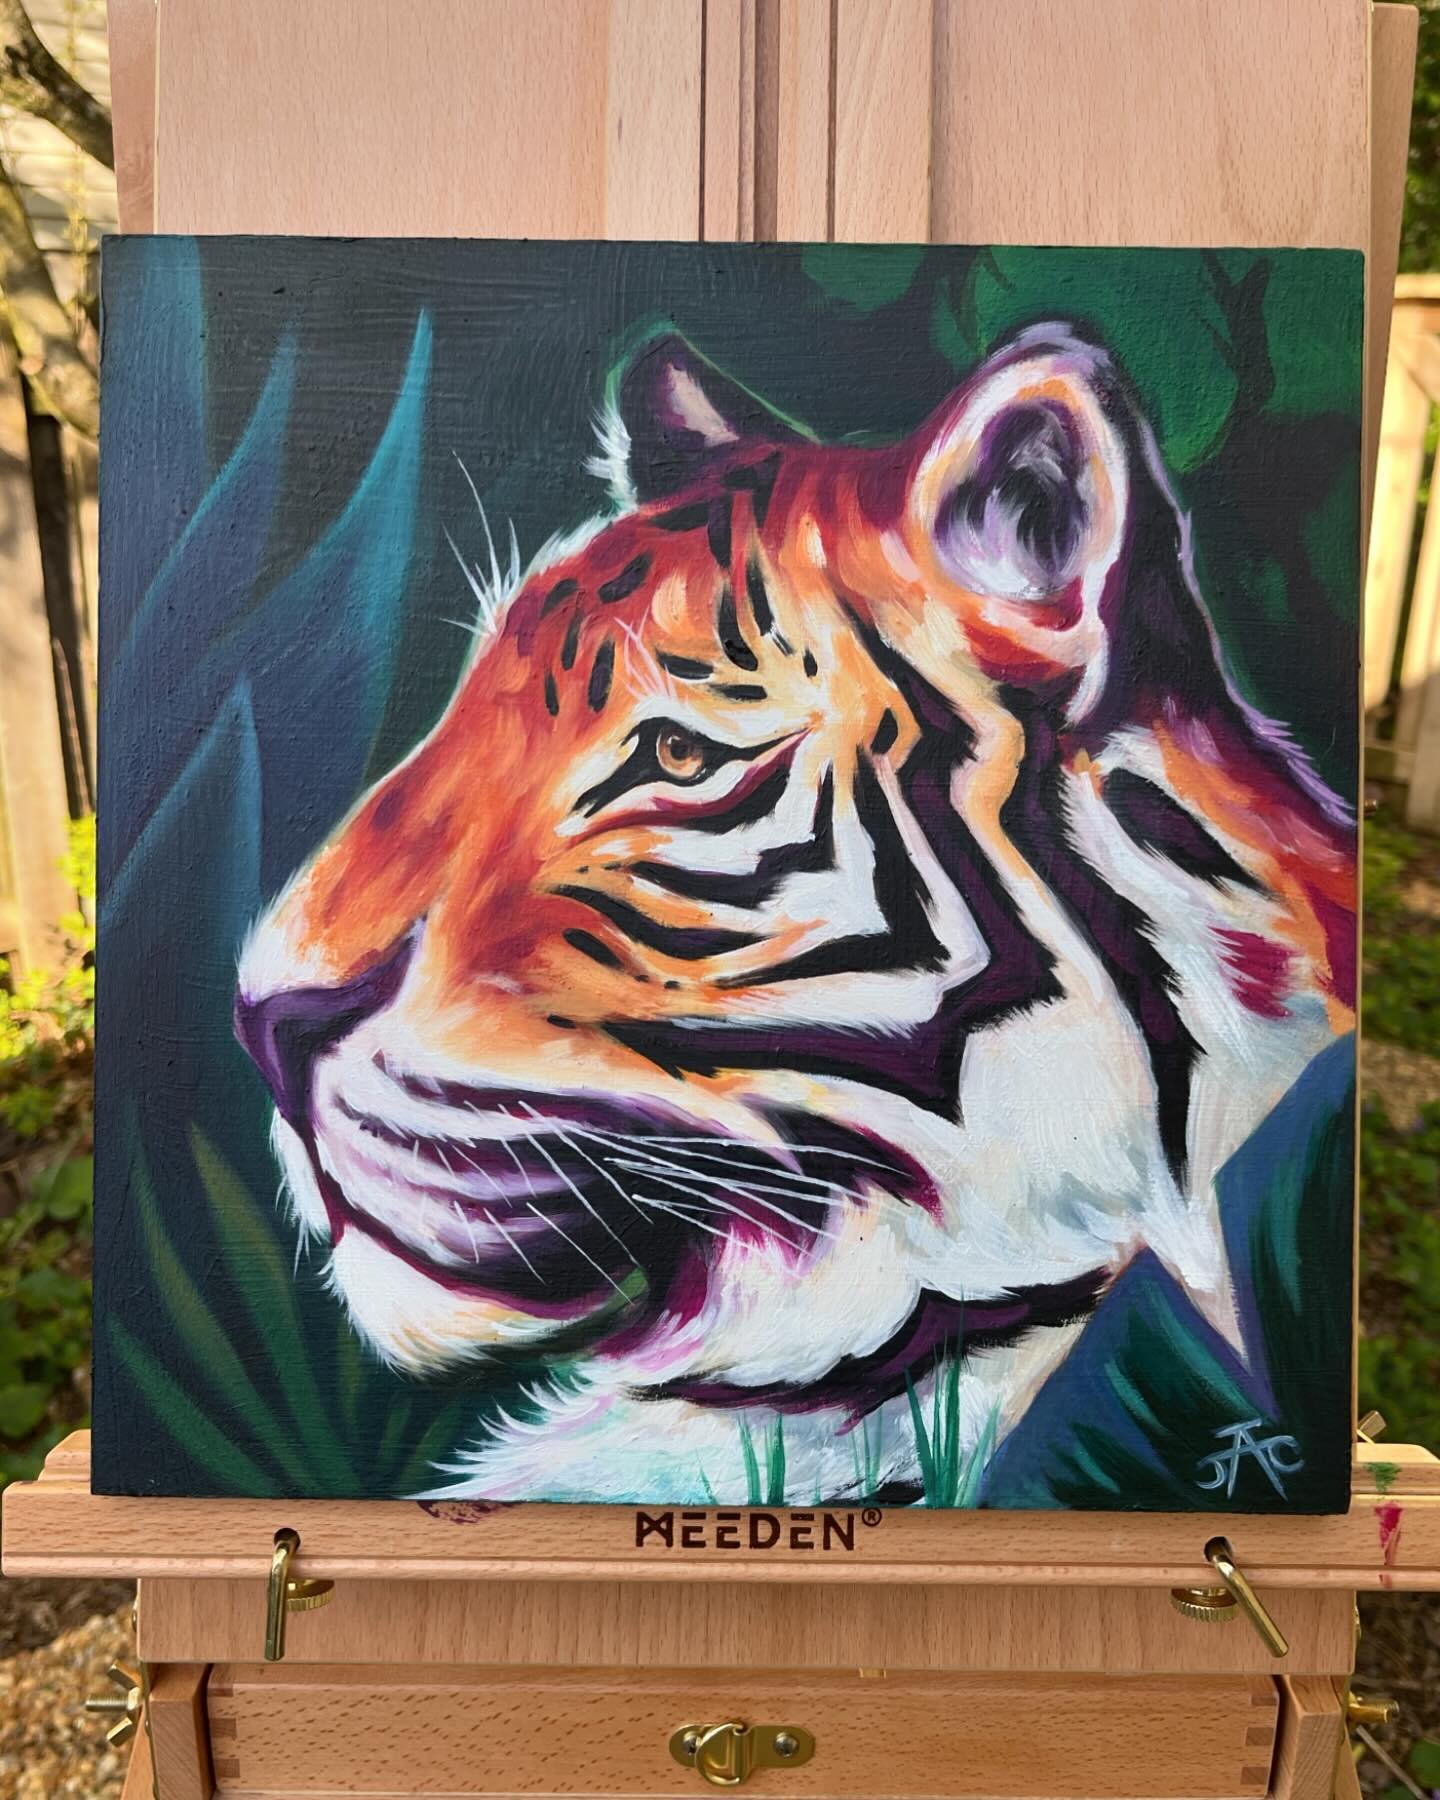 Happy Sunday! 

Reused an old wood panel to give life to one of my big cat sketches. I was feeling the Lisa Frank bright rainbow colors when painting this. 💜💛🧡

12x12 oil painting on wood

#oilpainting #meedenart #bigcatswildlife #artistsoninstagr